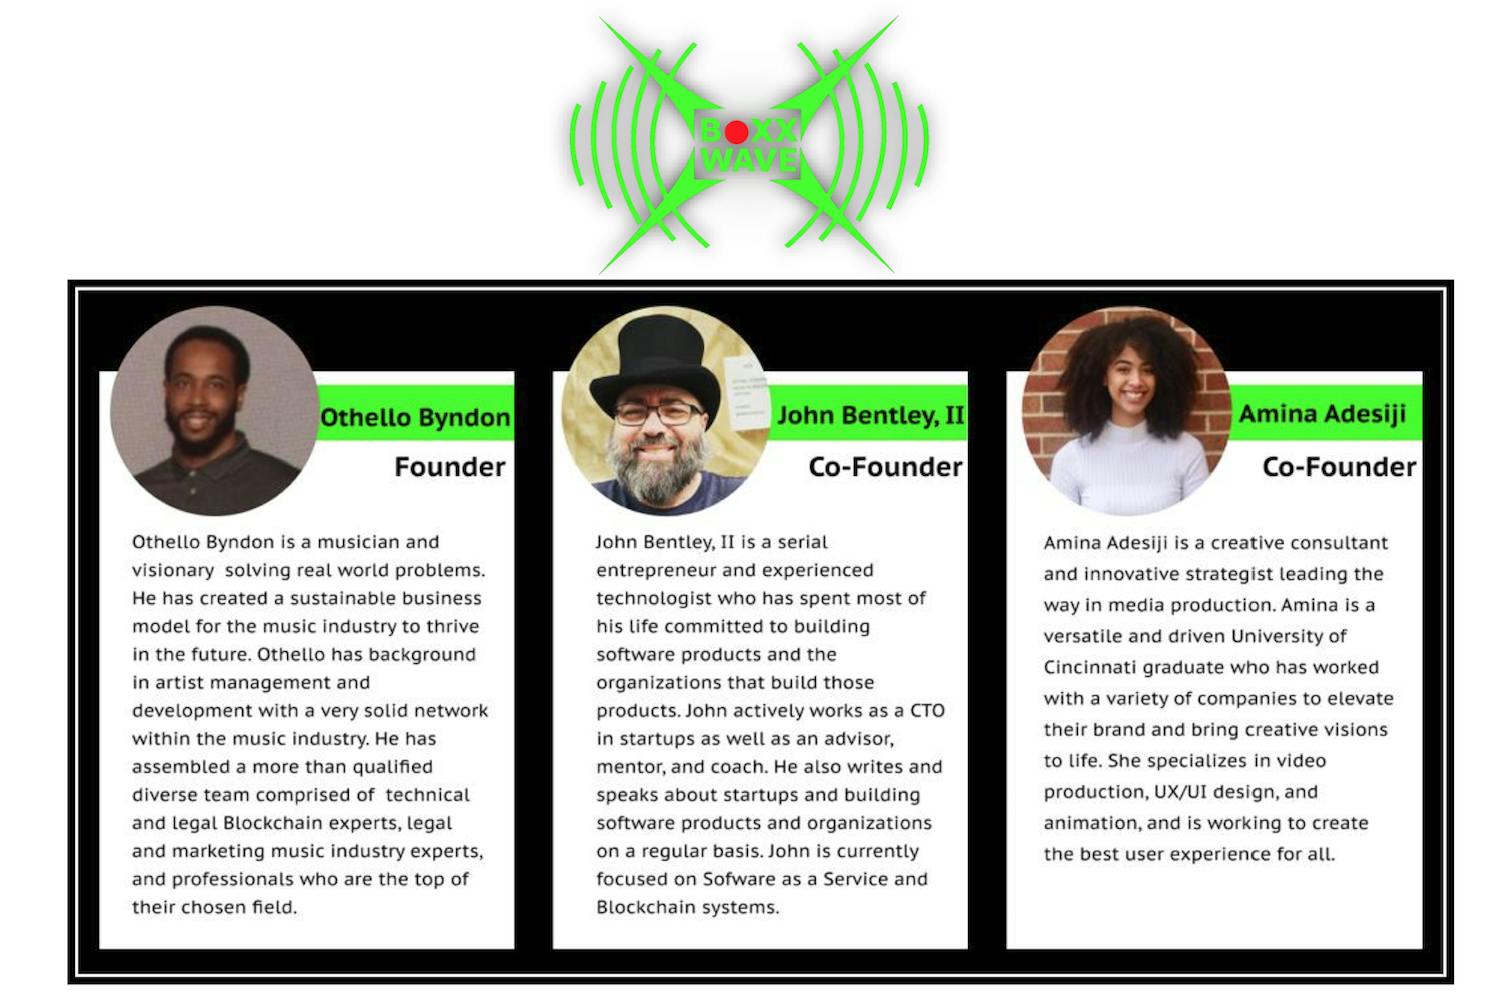 The Boxxwave team is comprised of experienced music, marketing, and block chain professionals. Othello Byndon is CEO, John Bentley II is CTO, and Amina Adesiji is marketing co-founder.